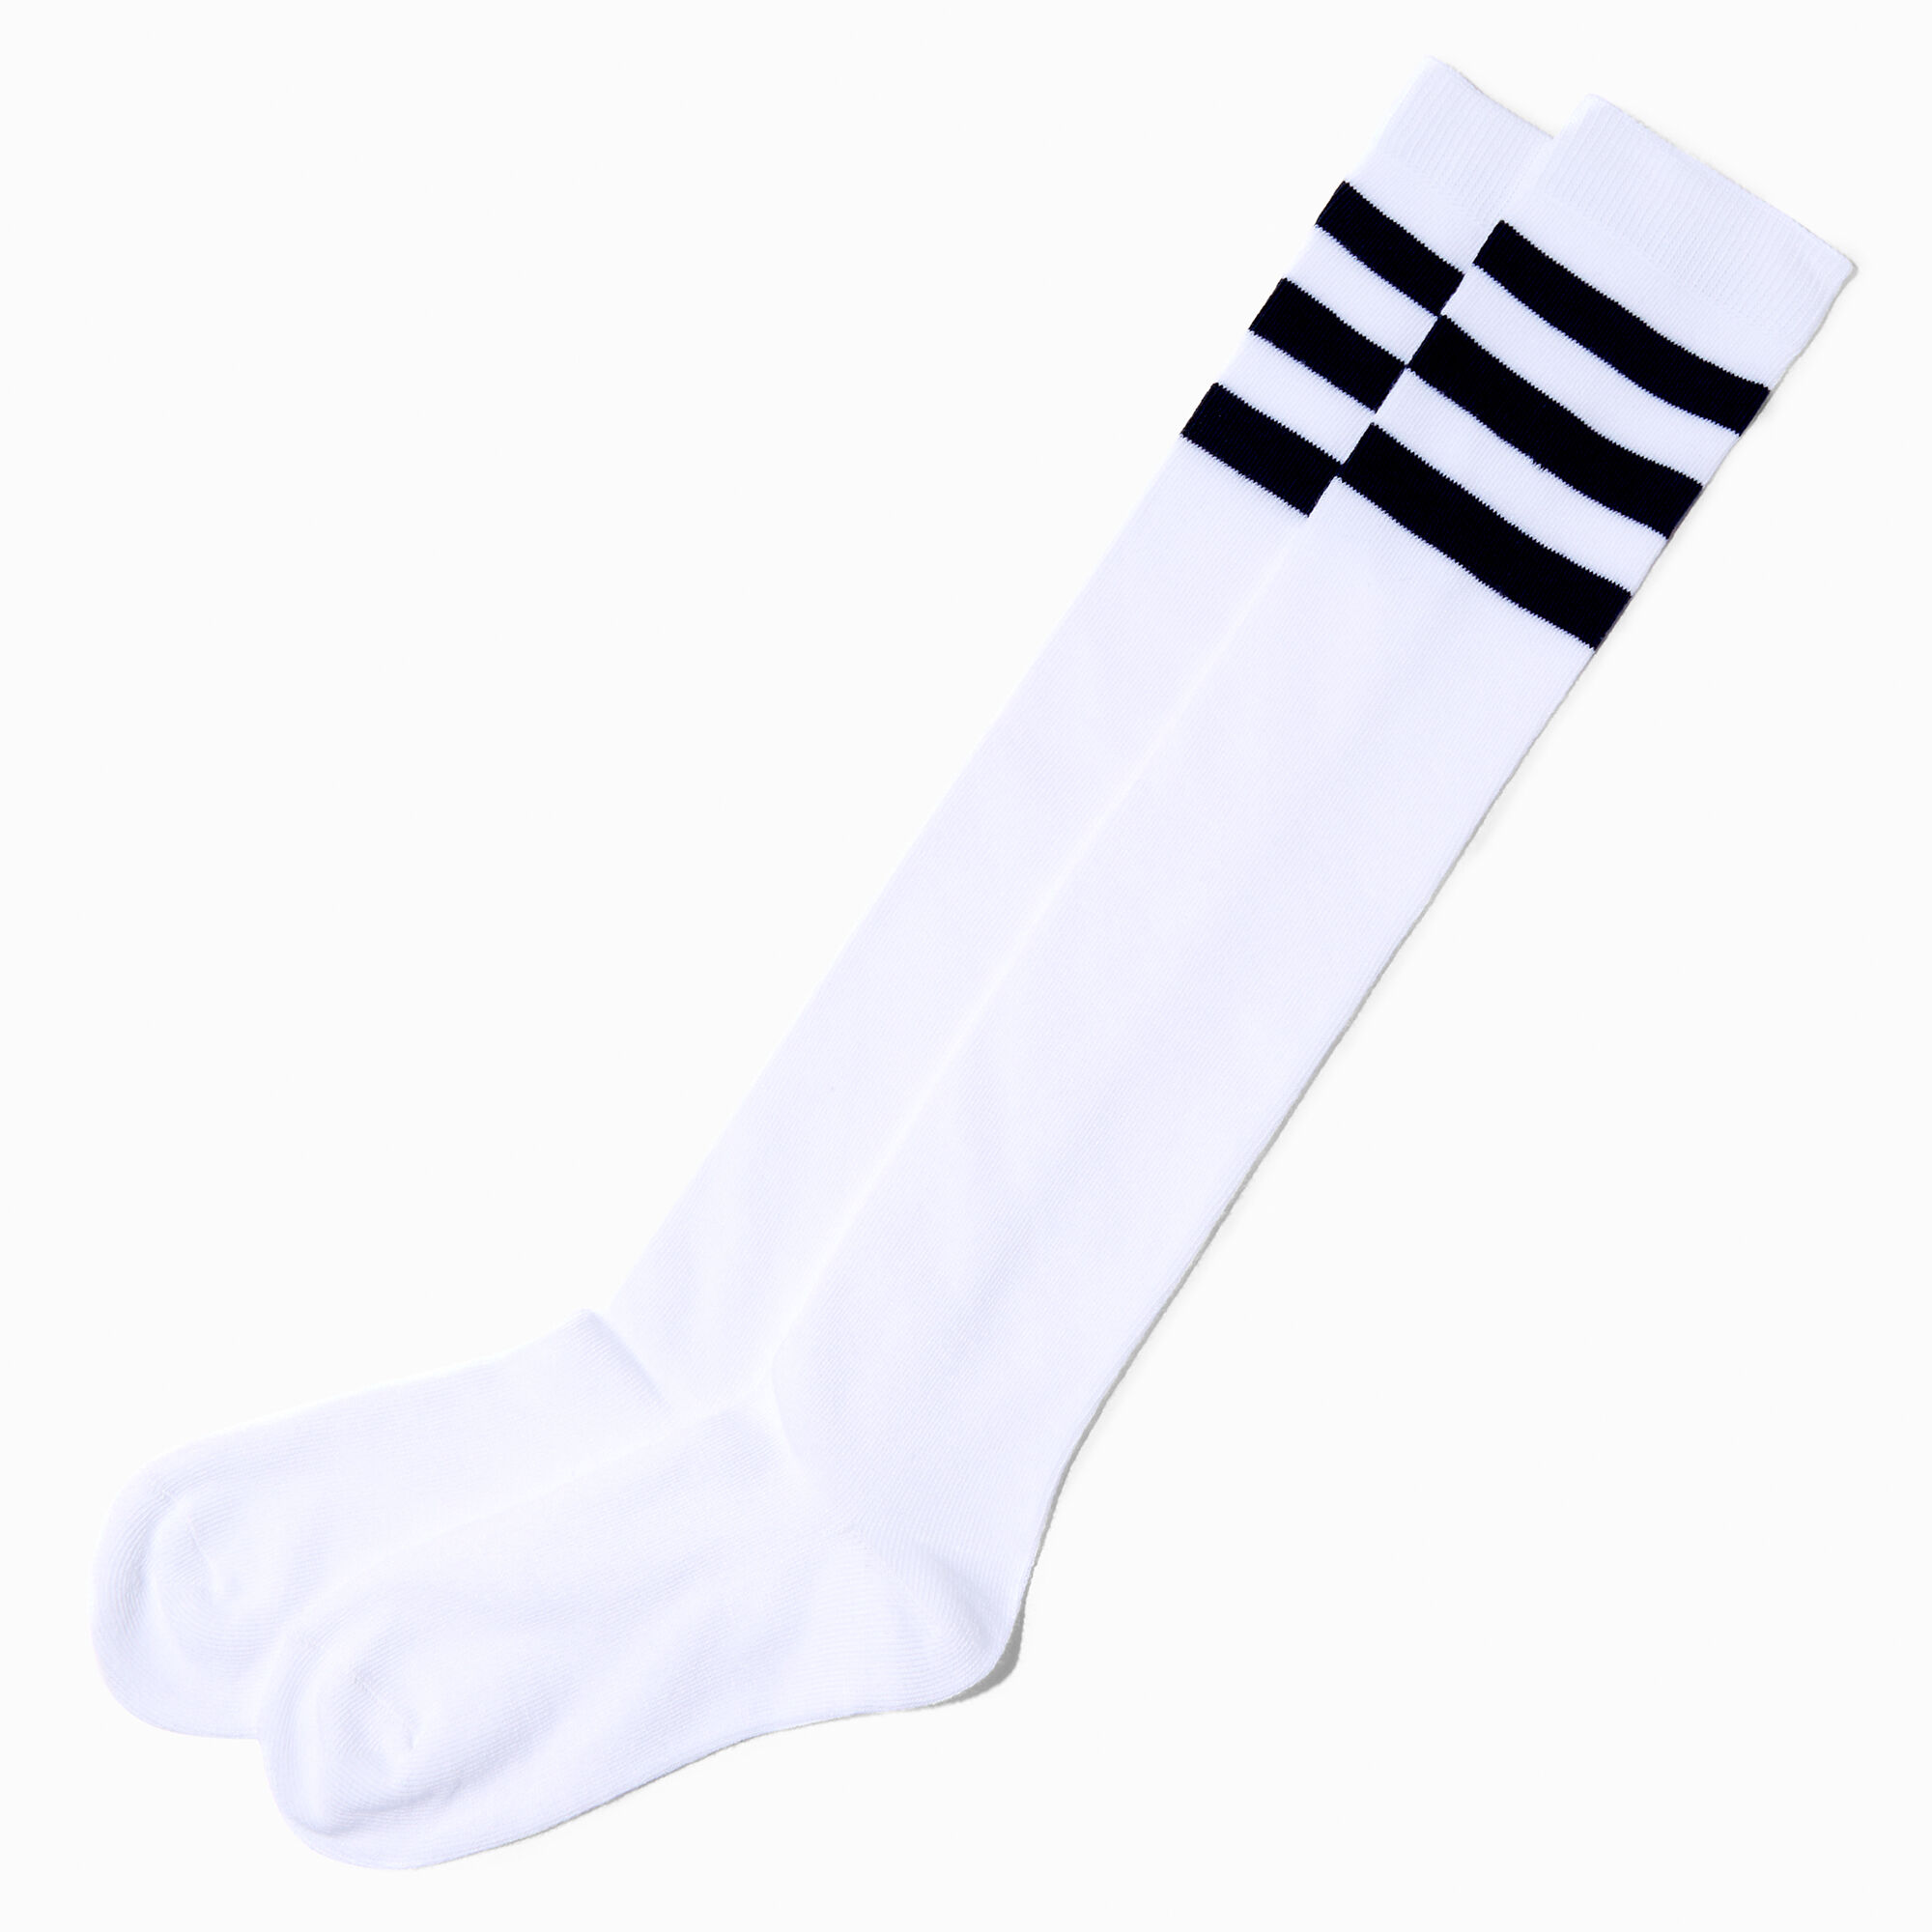 View Claires Stripe Over The Knee Socks Black information